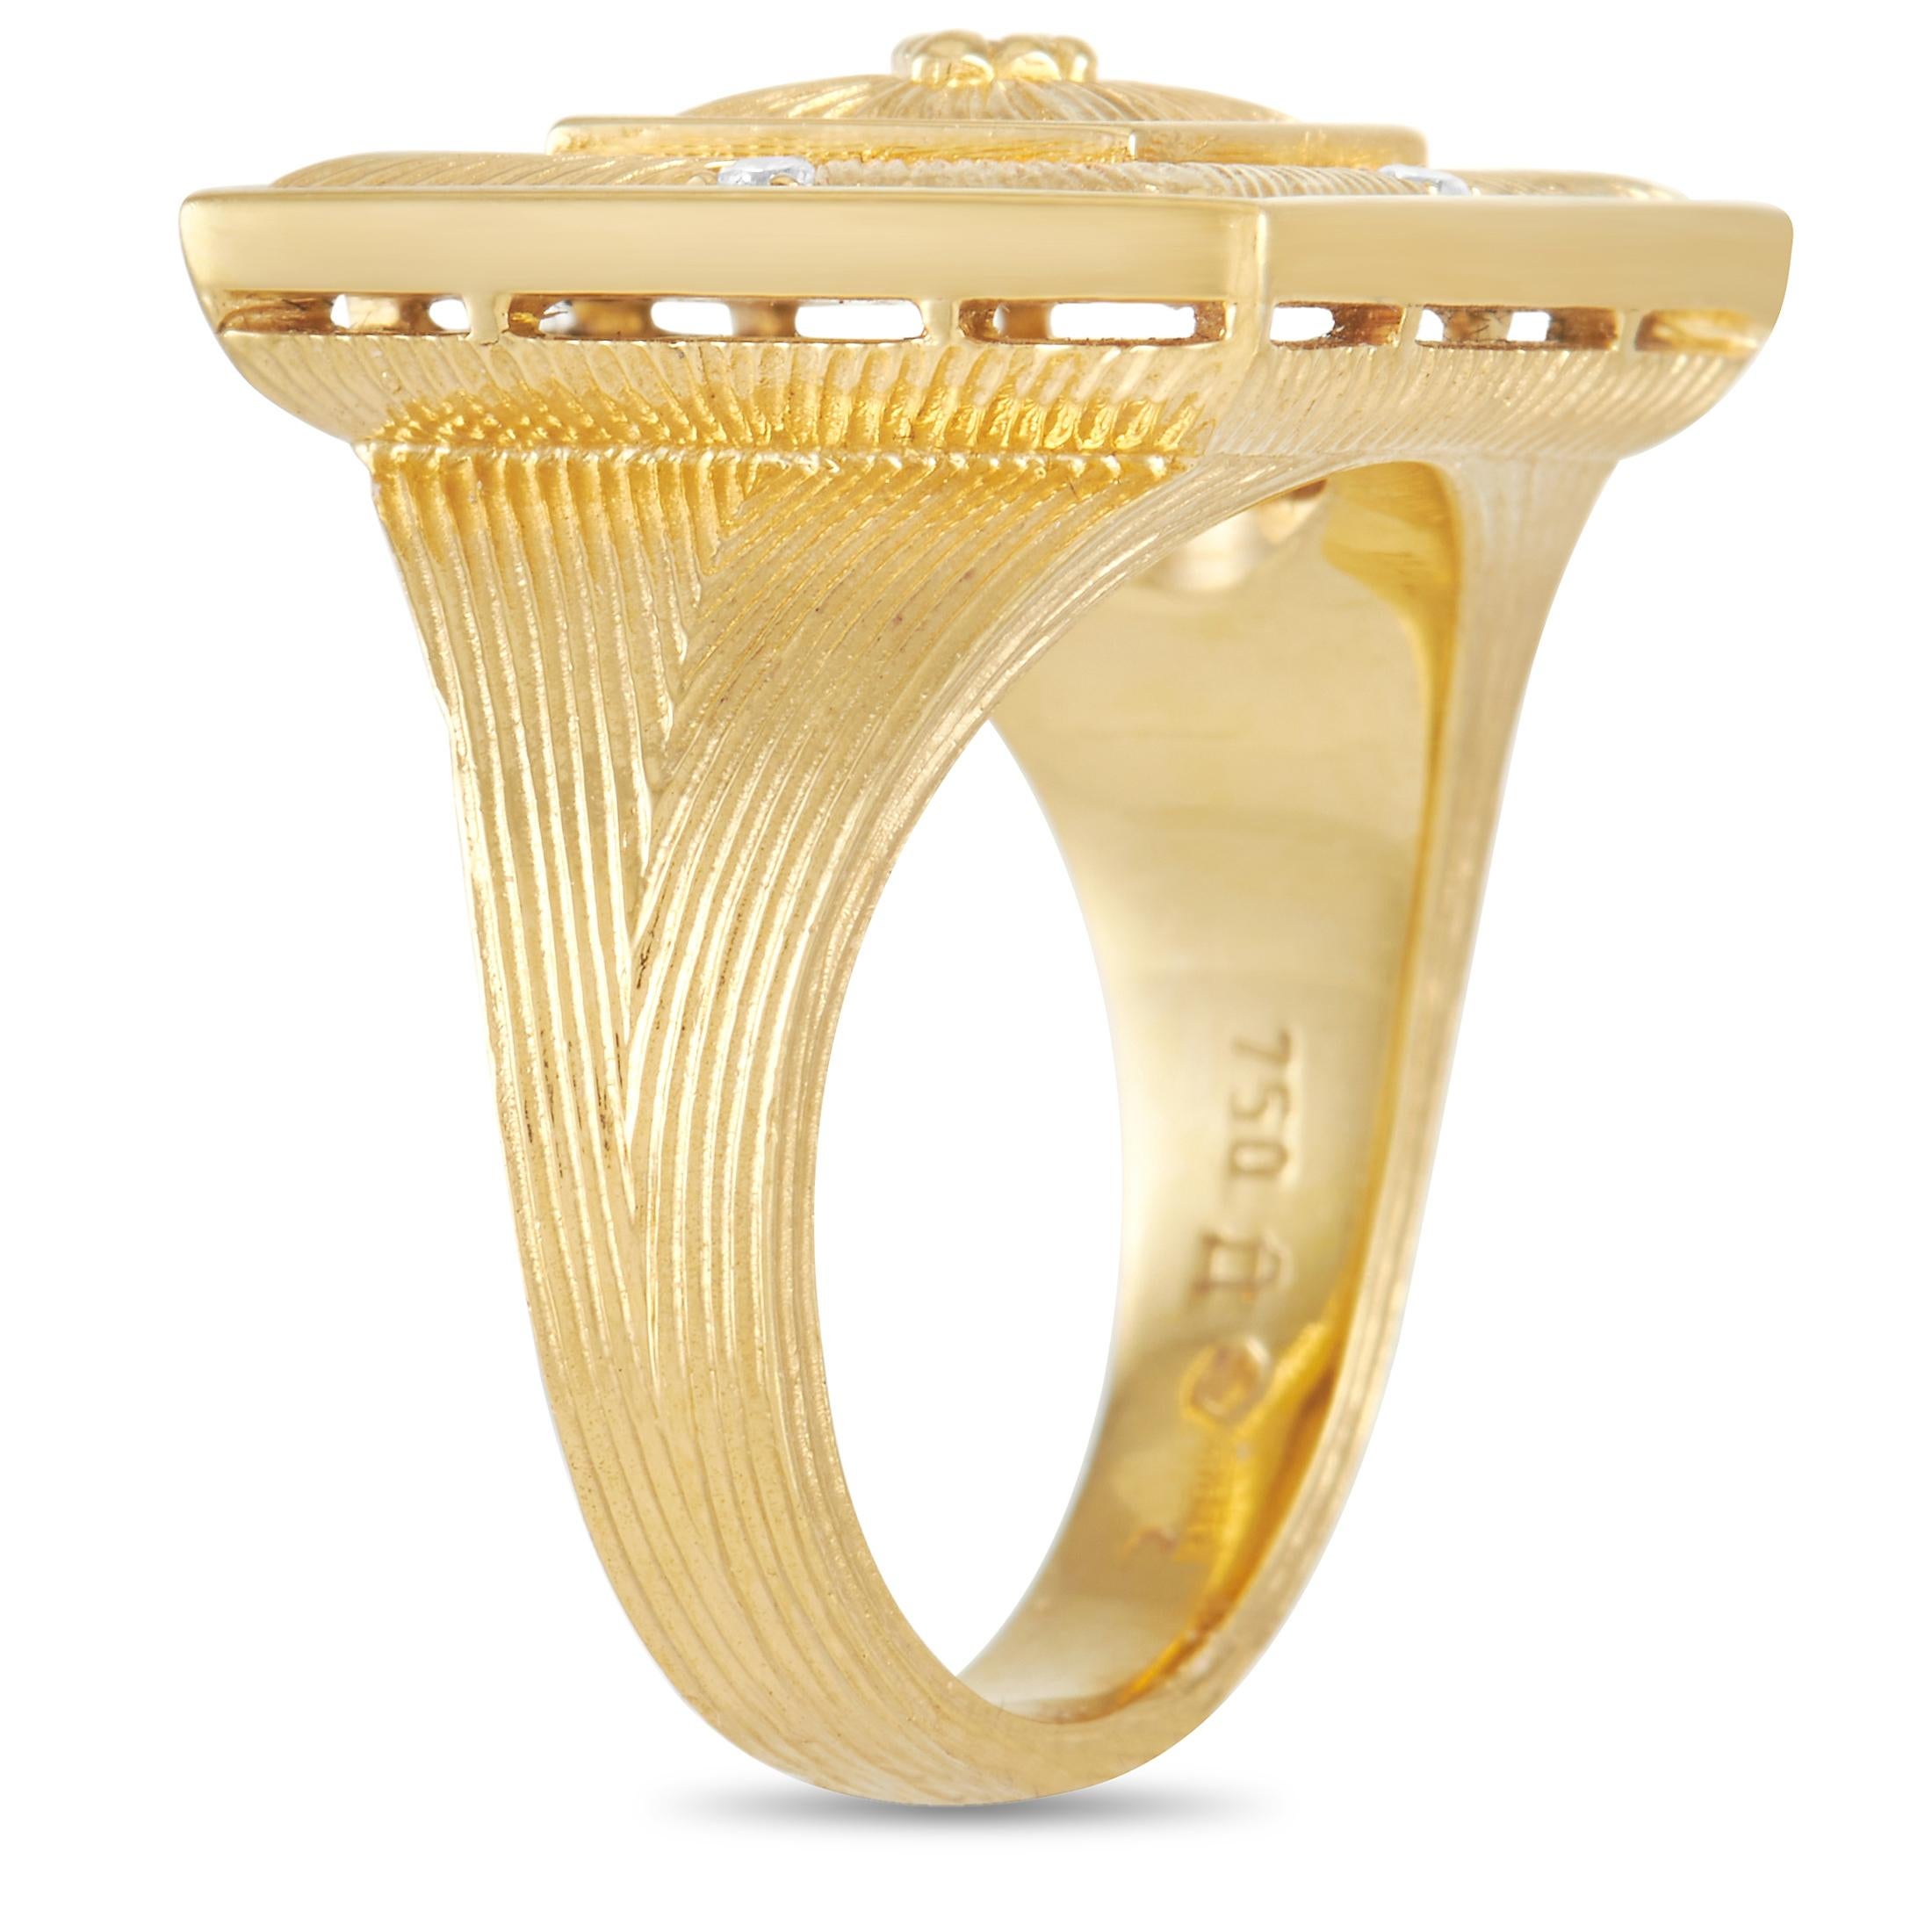 This luxury ring from Buccellati is an opulent piece that will instantly elevate any ensemble. Crafted from lustrous 18K Yellow Gold, exquisite metalwork on the stylish square top sets this design apart from all others. It’s also accented by